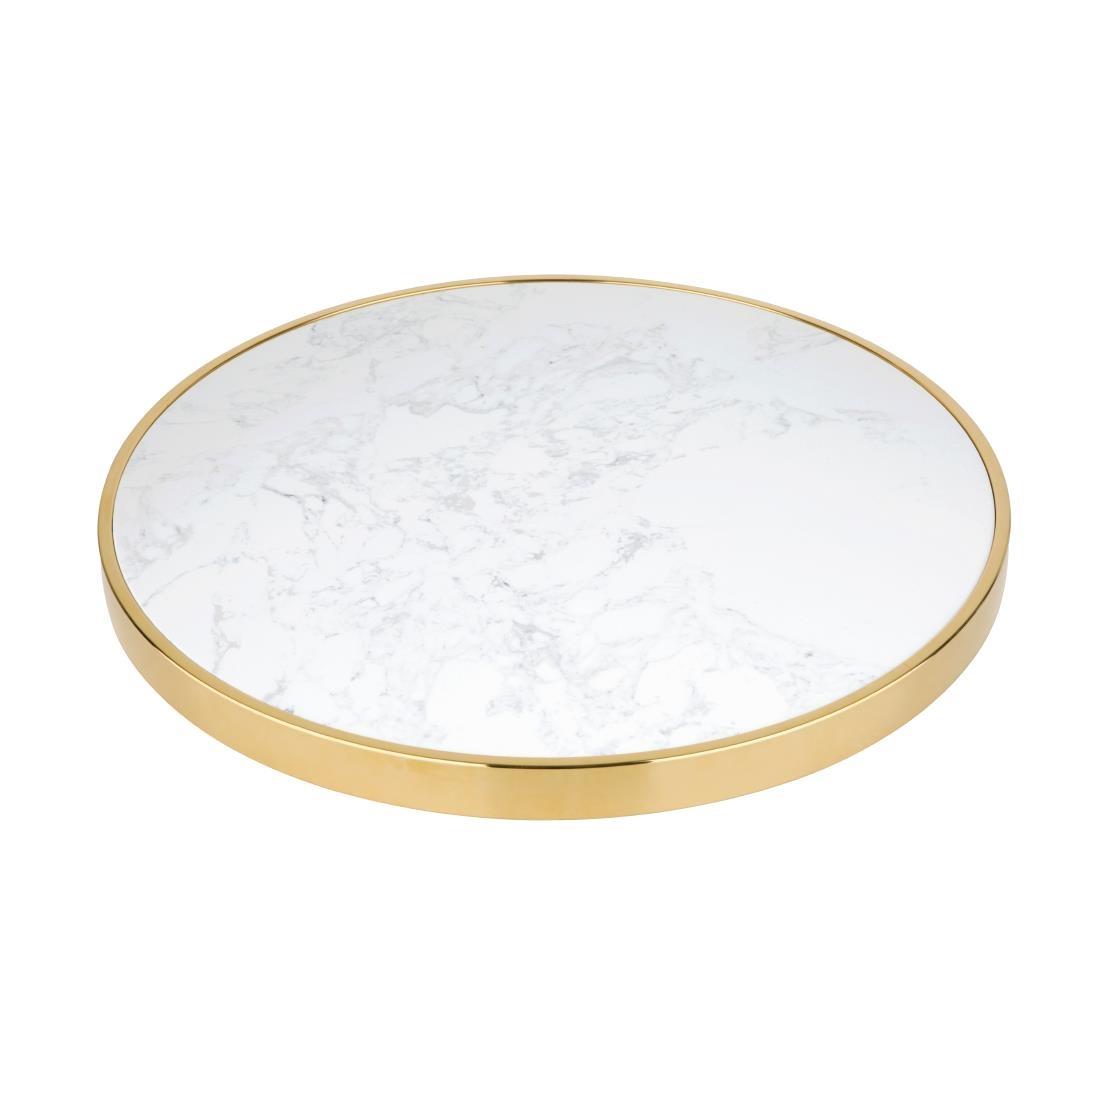 Bolero Round Marble Table Top with Brass Effect Rim White 600mm - CY968  - 3